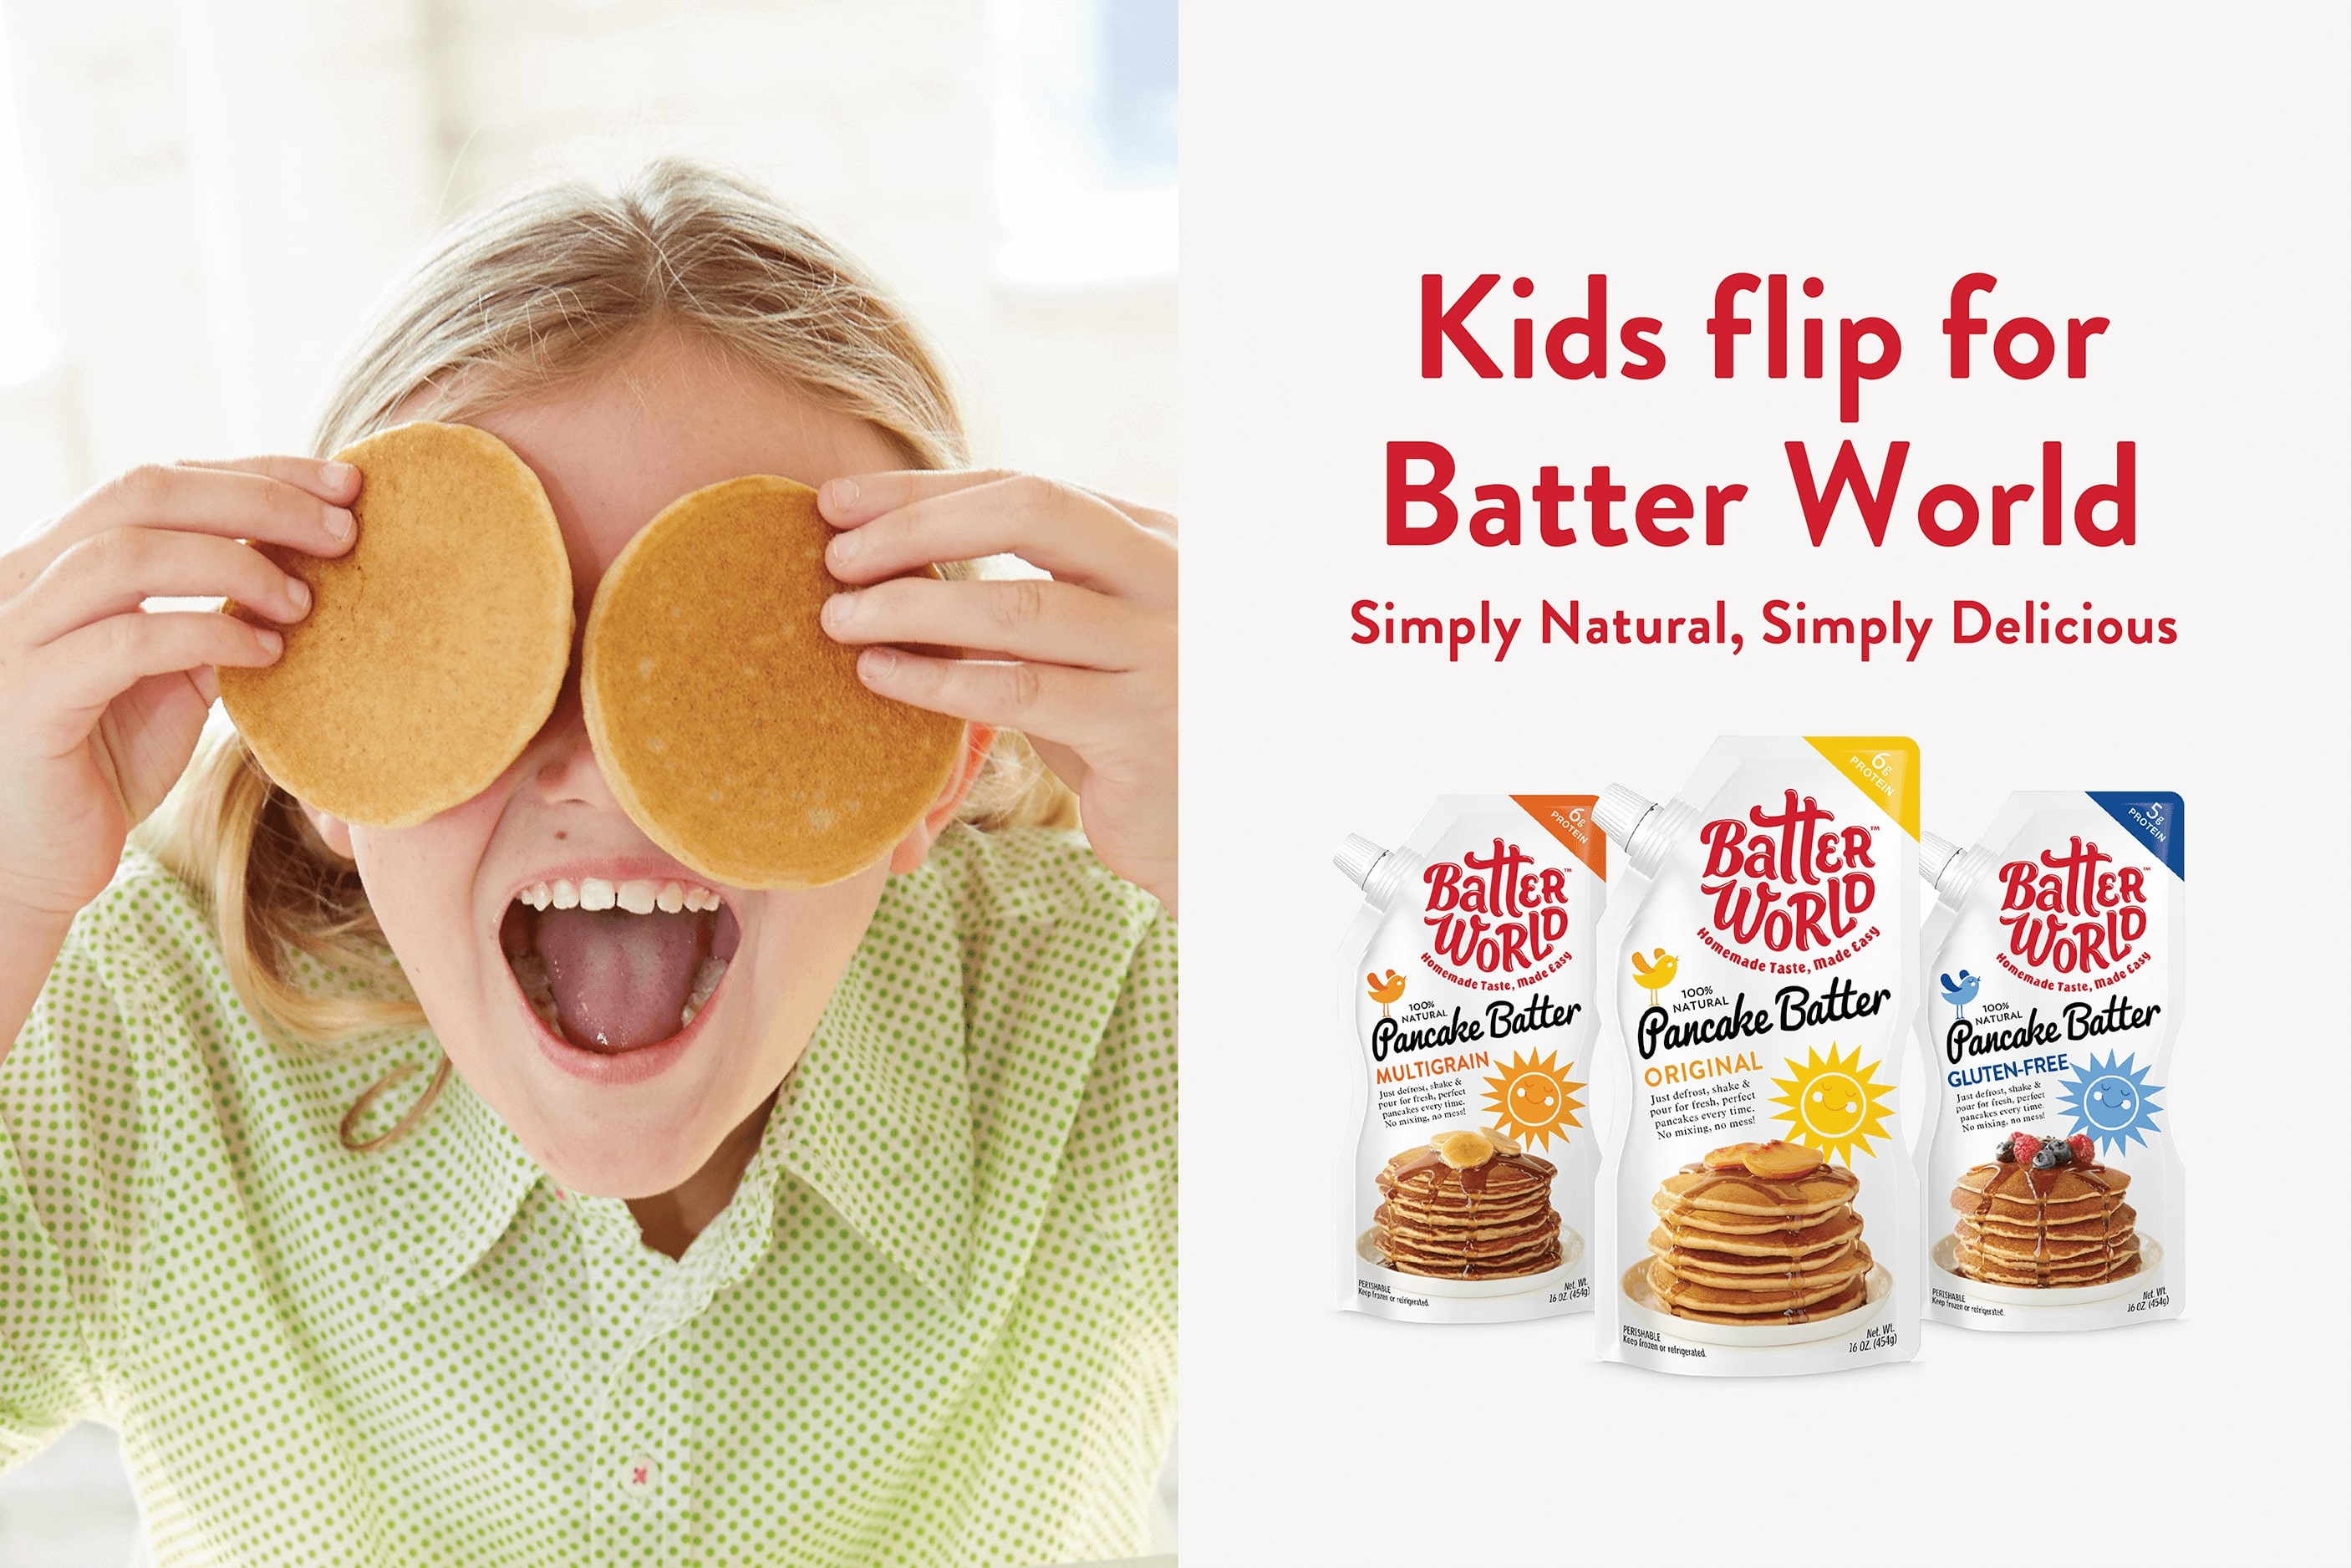 A young girl flipping out for Batter World pancake Mix.